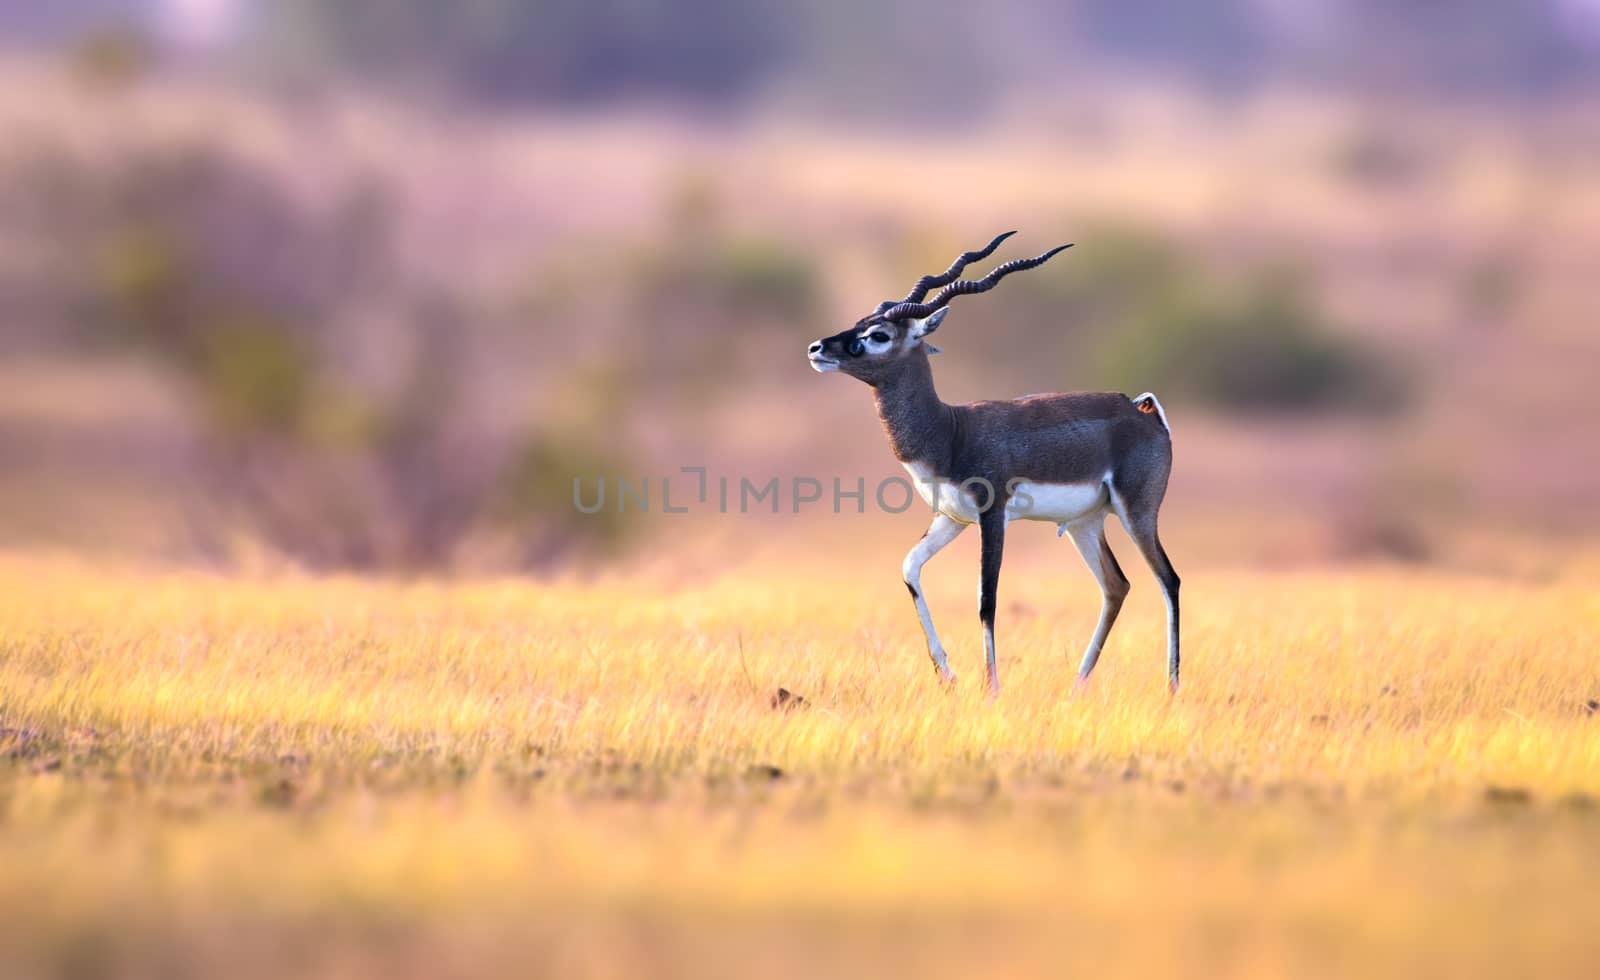 The blackbuck, also known as the Indian antelope, is an antelope found in India, Nepal, and Pakistan.